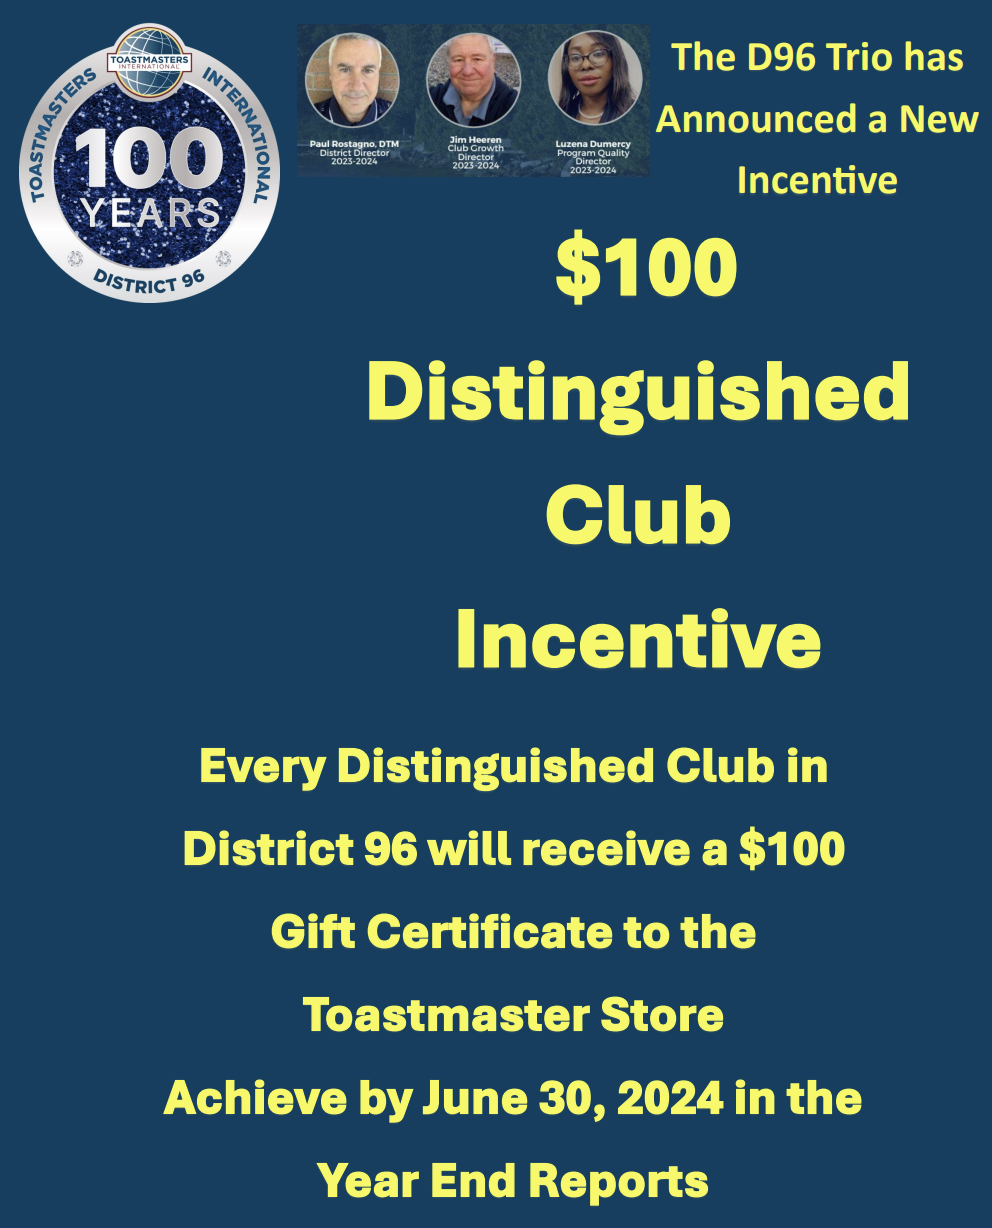 All Distinguished Clubs Earn $100 Incentive